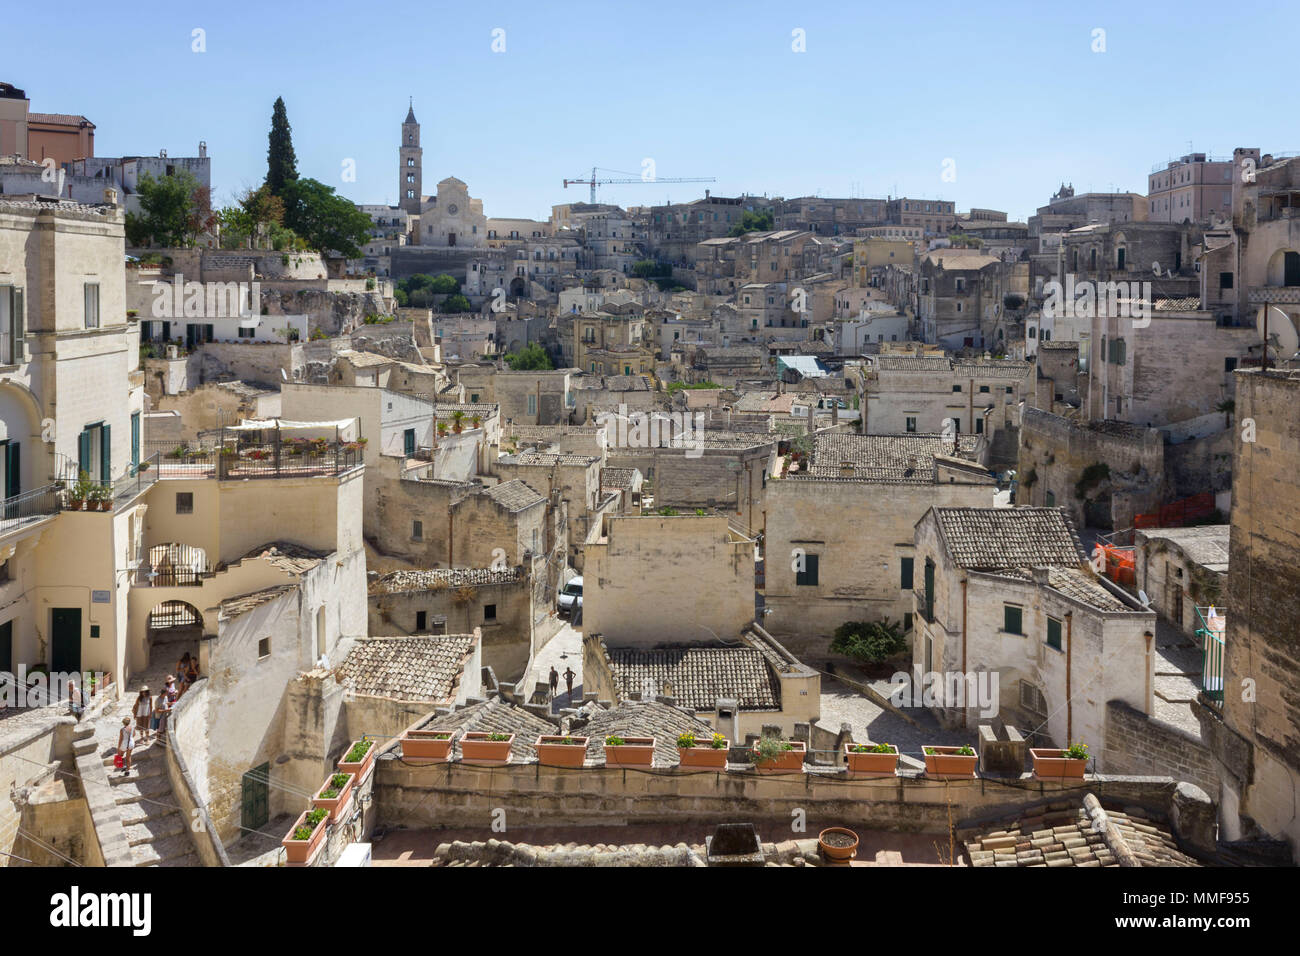 MATERA, ITALY - AUGUST 25 2017: Matera ancient rupestrian houses in city center Stock Photo